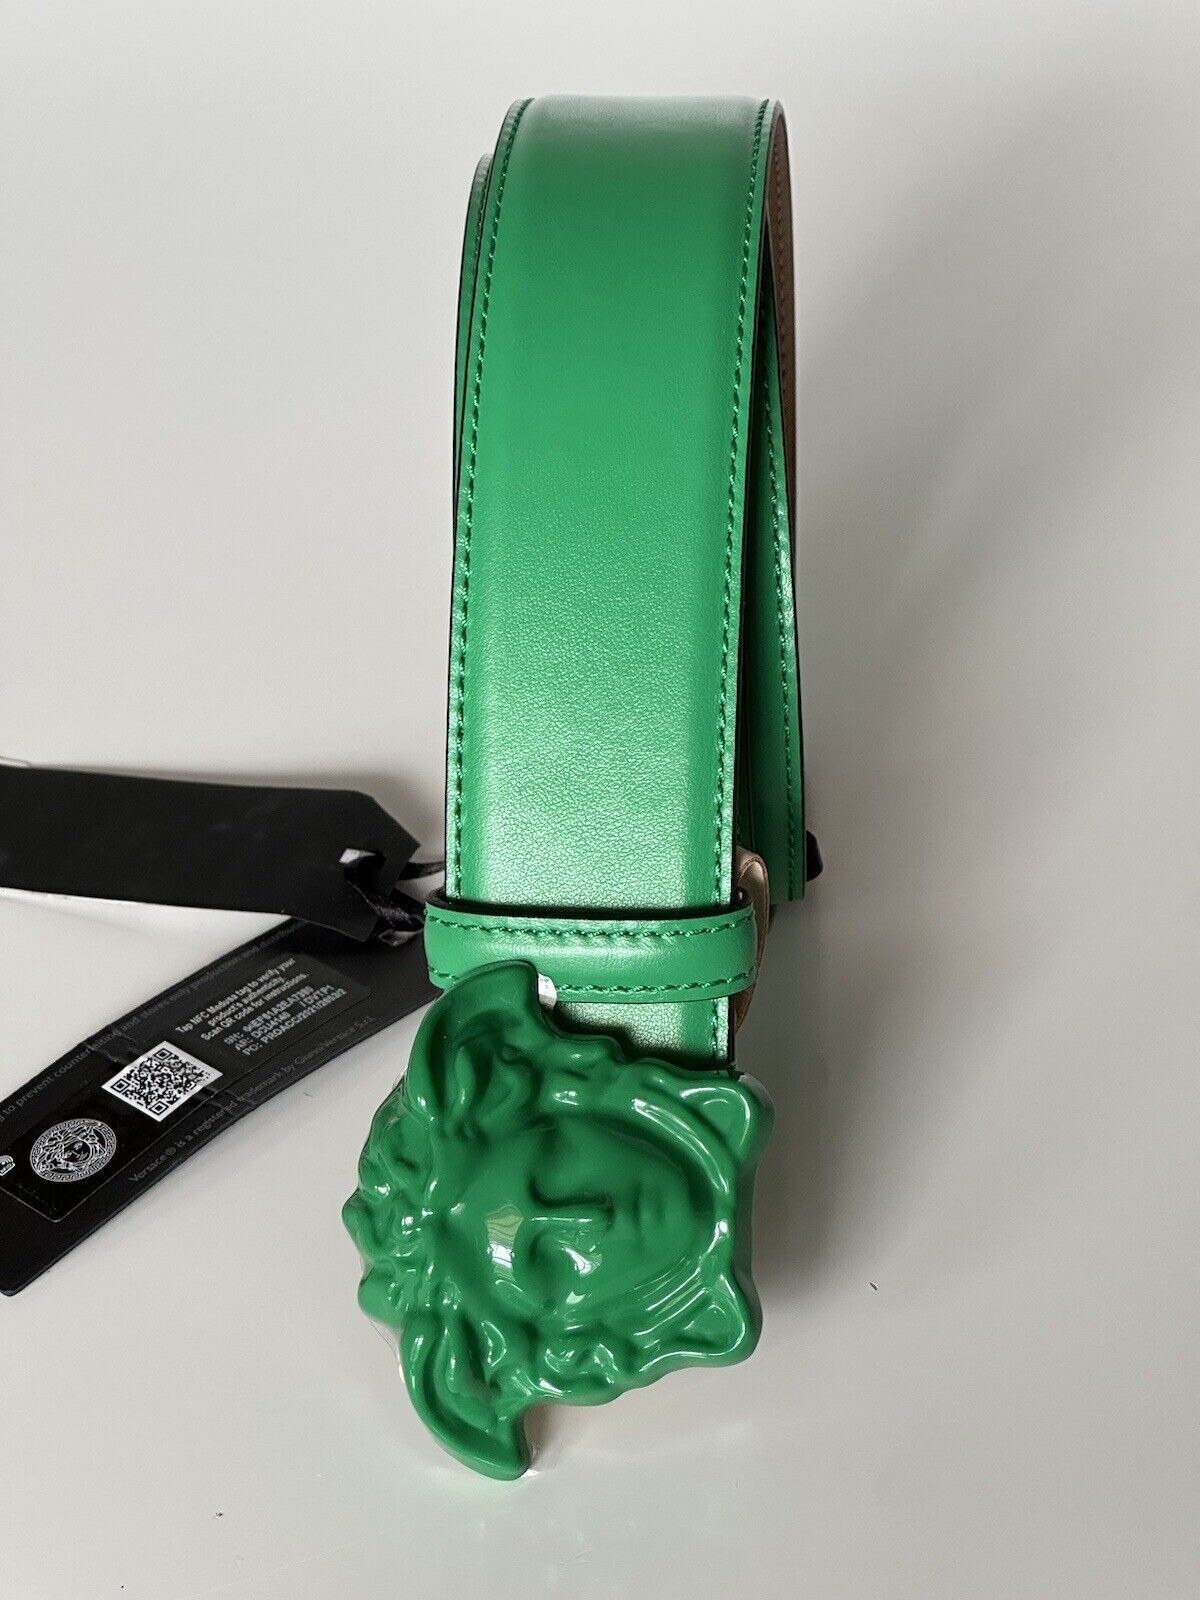 NWT $525 Versace Medusa-Buckle Bright Green Leather Belt 75 (30) Italy DCU4140